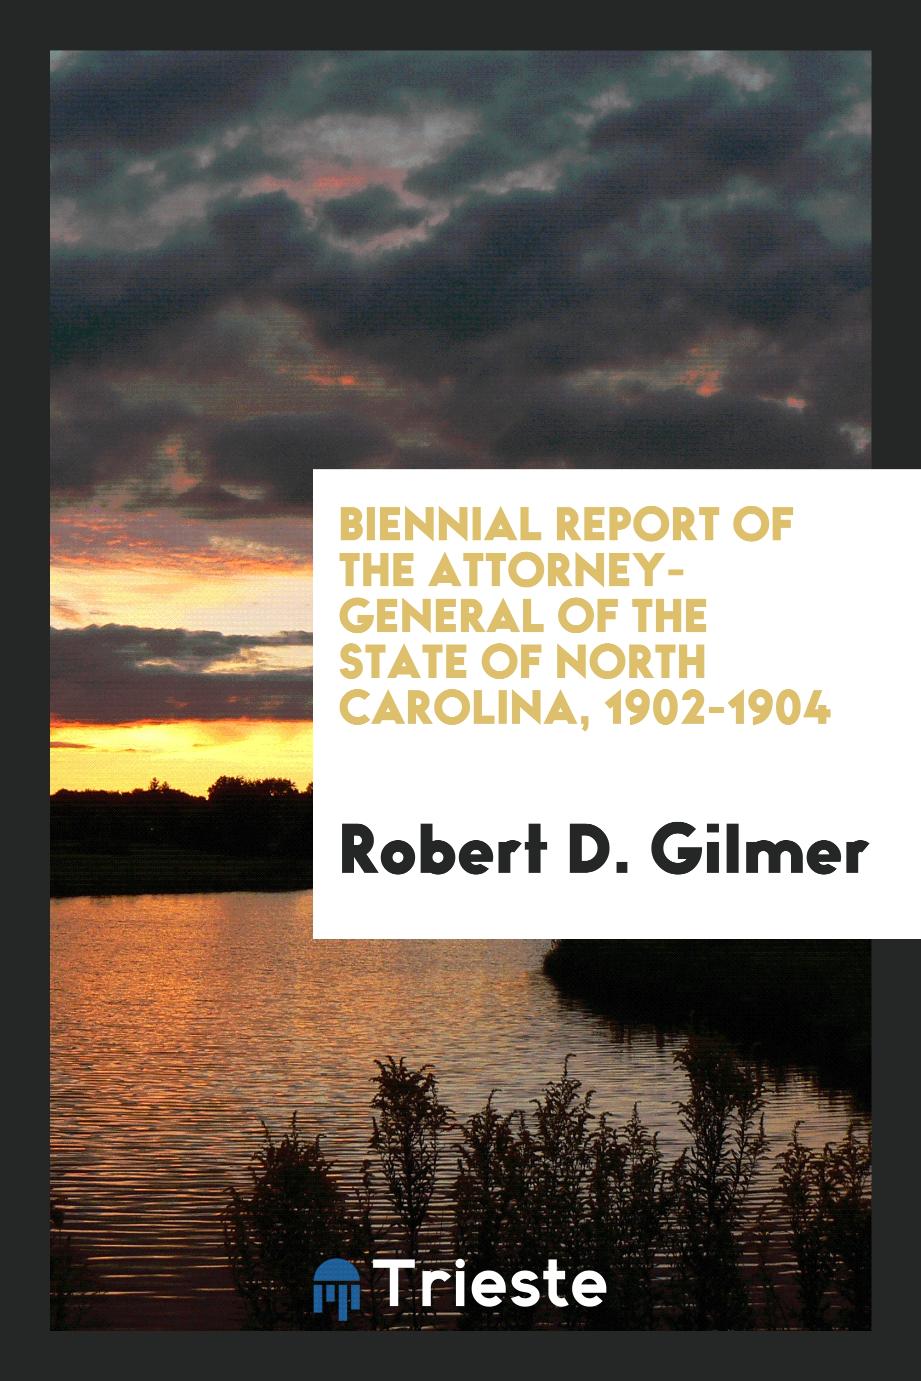 Biennial Report of the Attorney-General of the State of North Carolina, 1902-1904